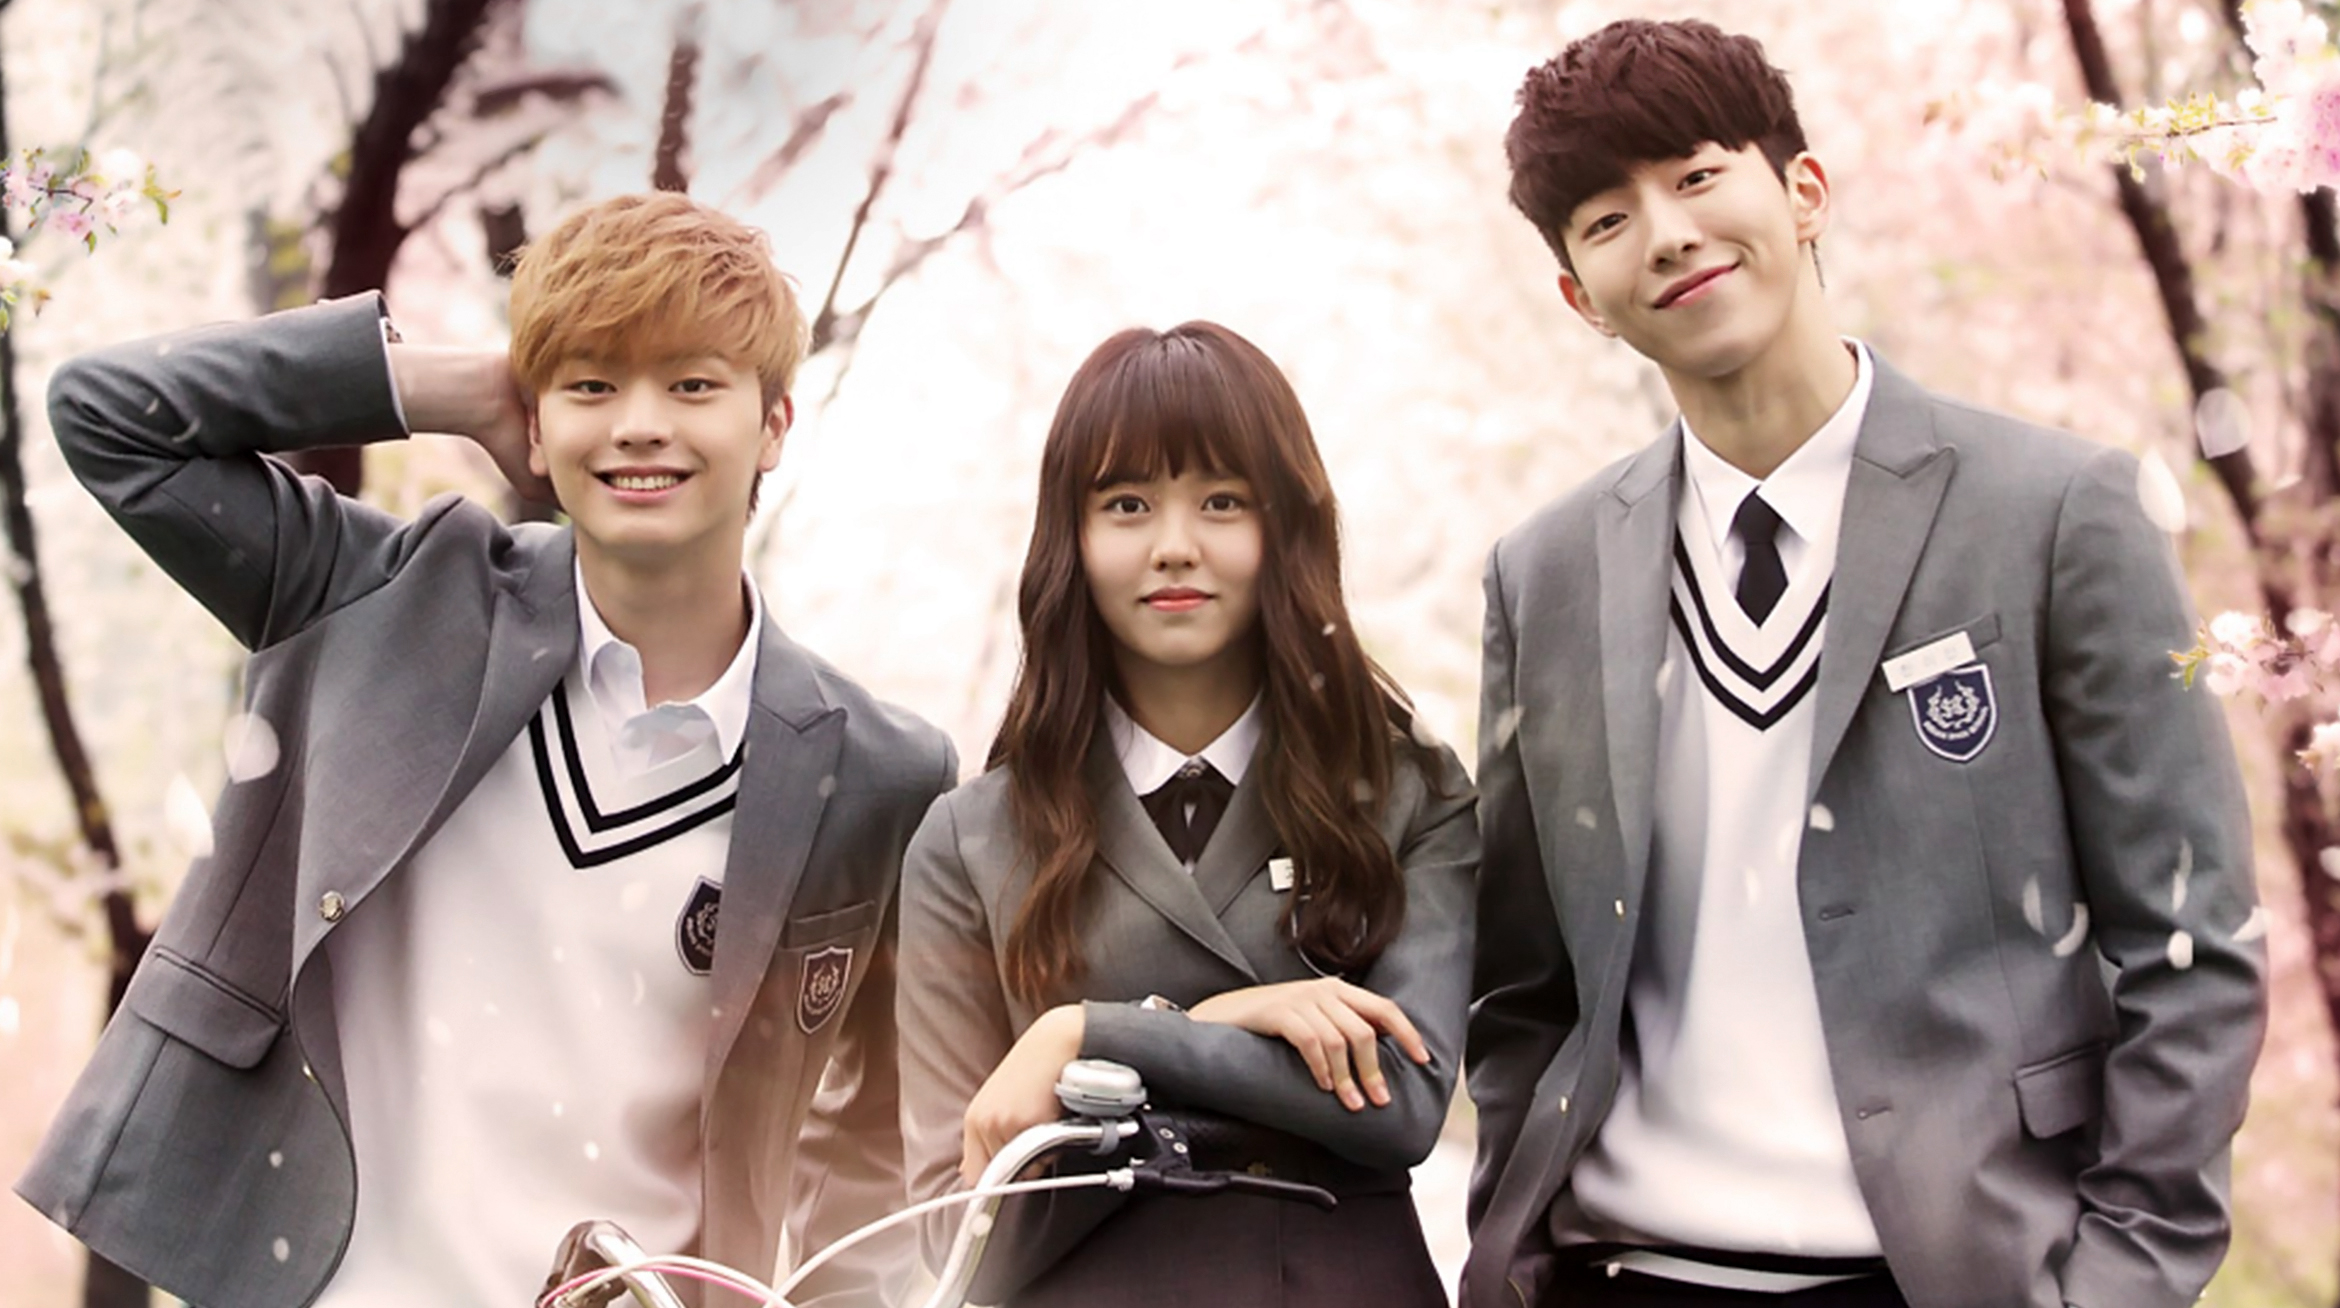 Banner Phim Học đường 2015 (Who Are You: School 2015)